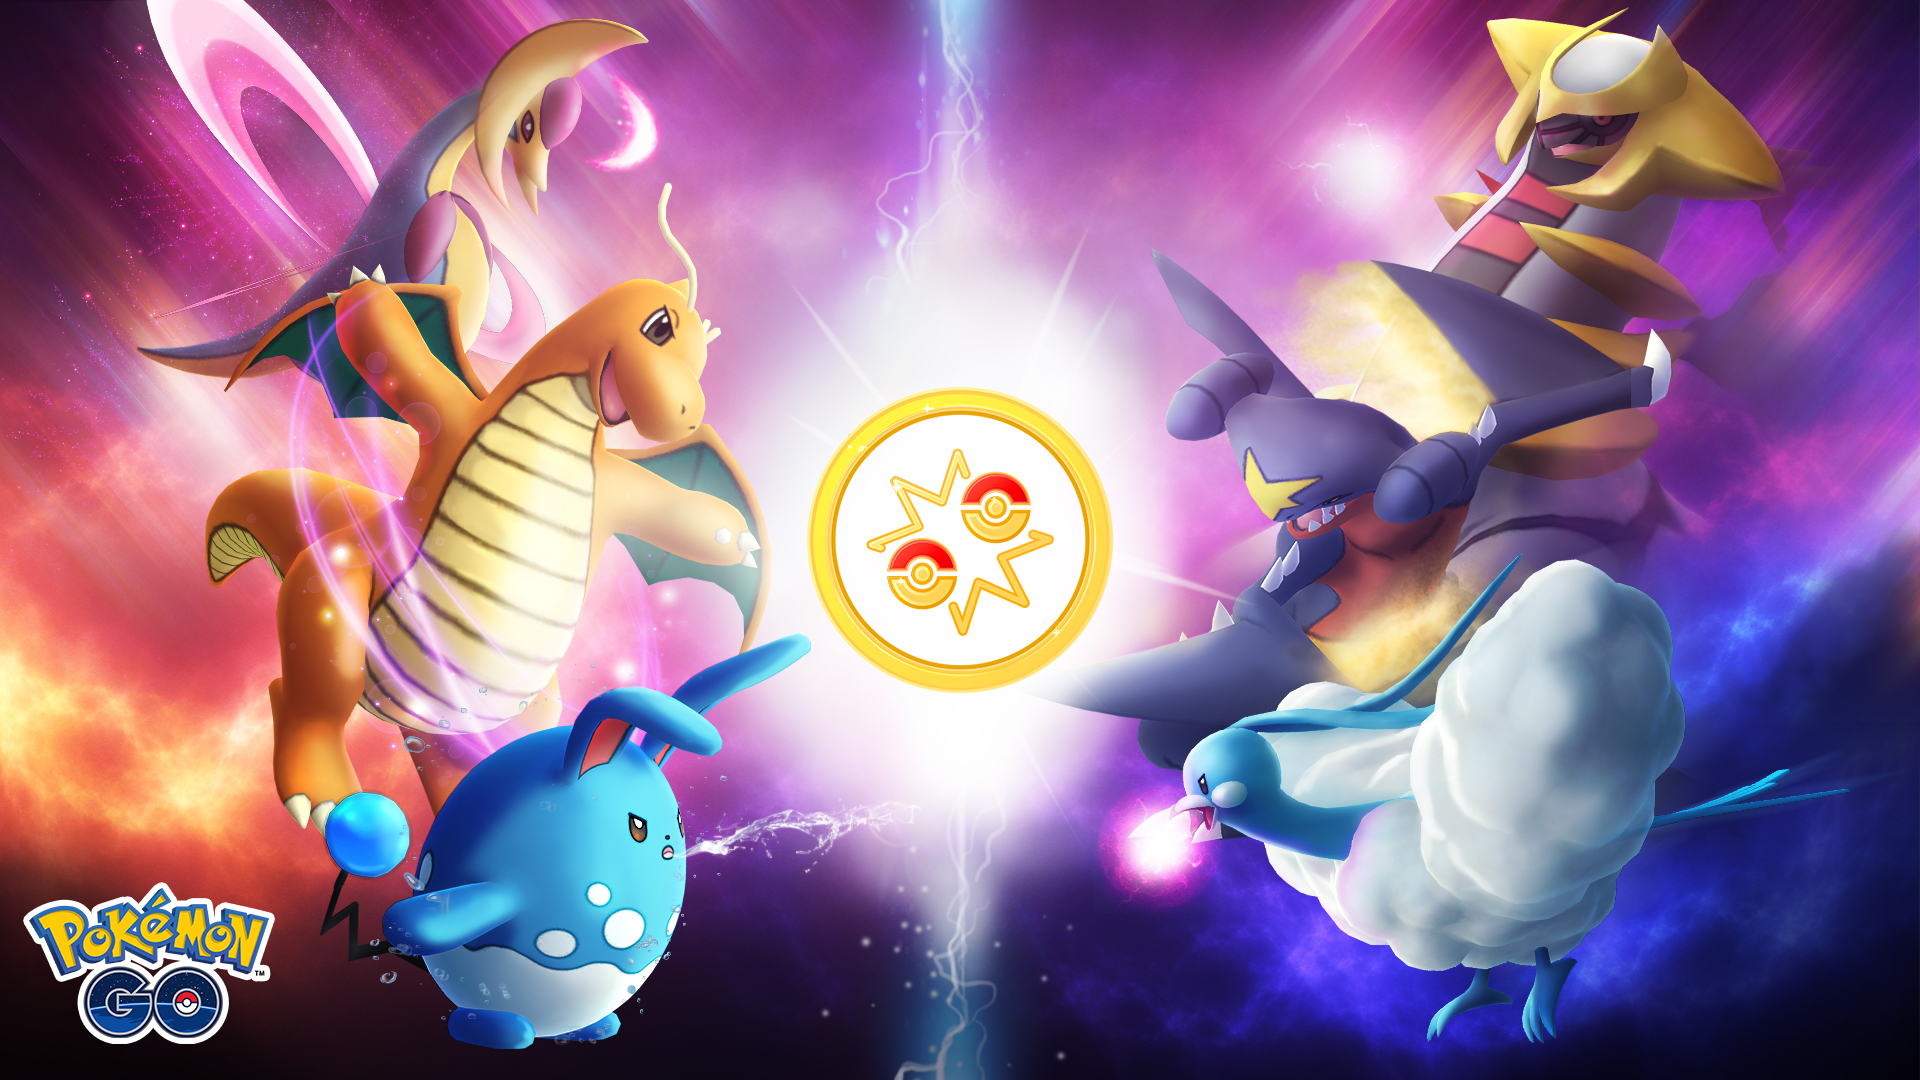 Pokemon Go Master League best team: These are the meta Pokemon you should be using